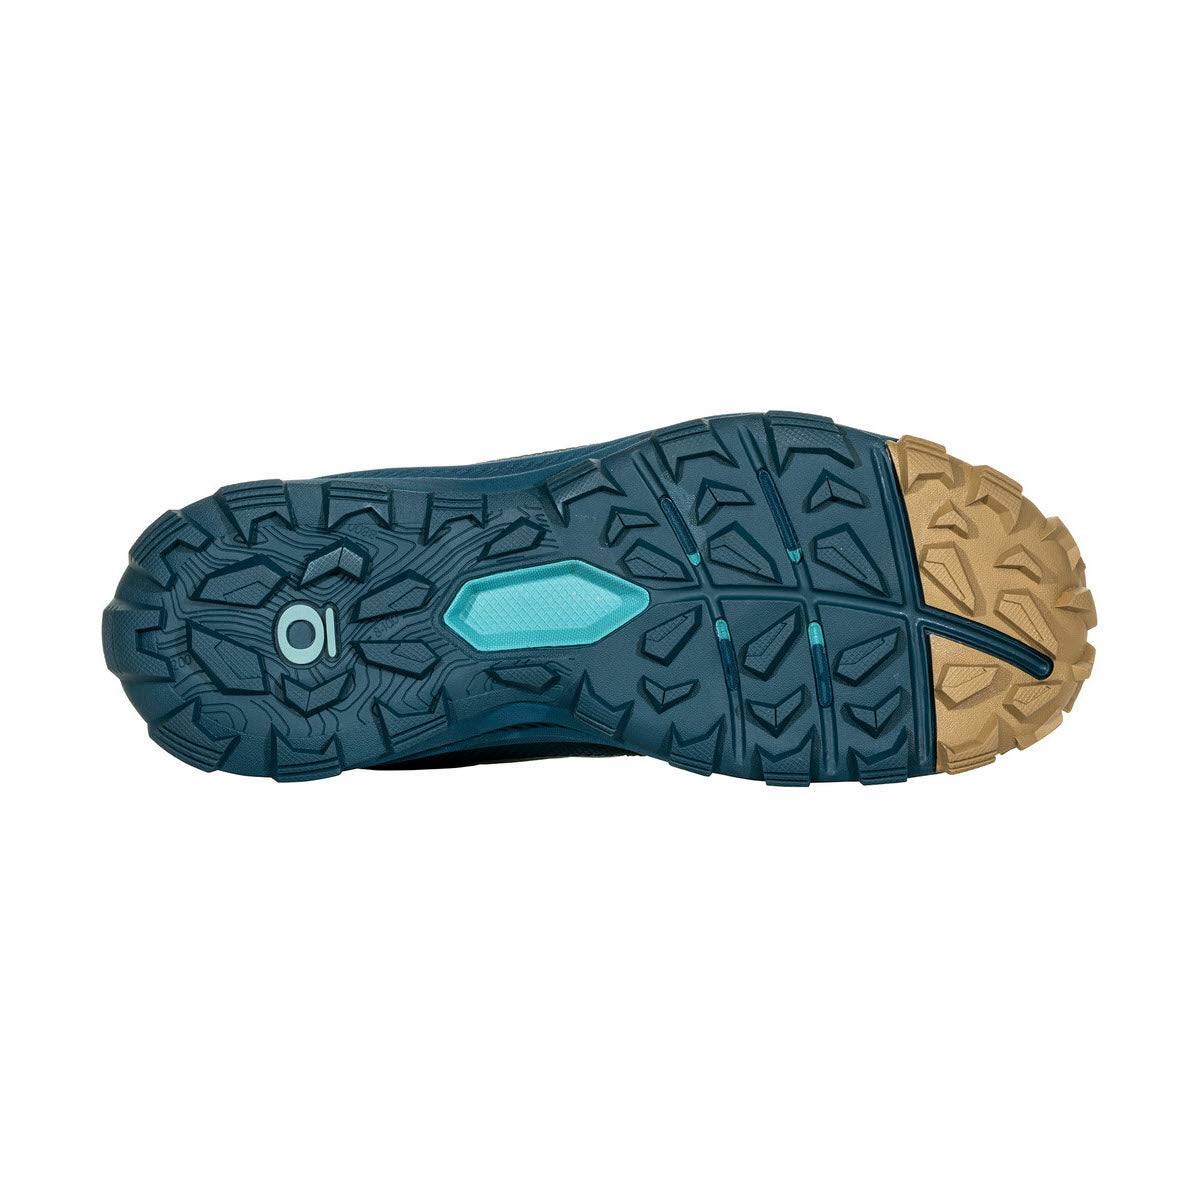 Sole of the Oboz Katabatic Low Dark Island hiking shoe with a multi-colored tread pattern in blue and brown tones.